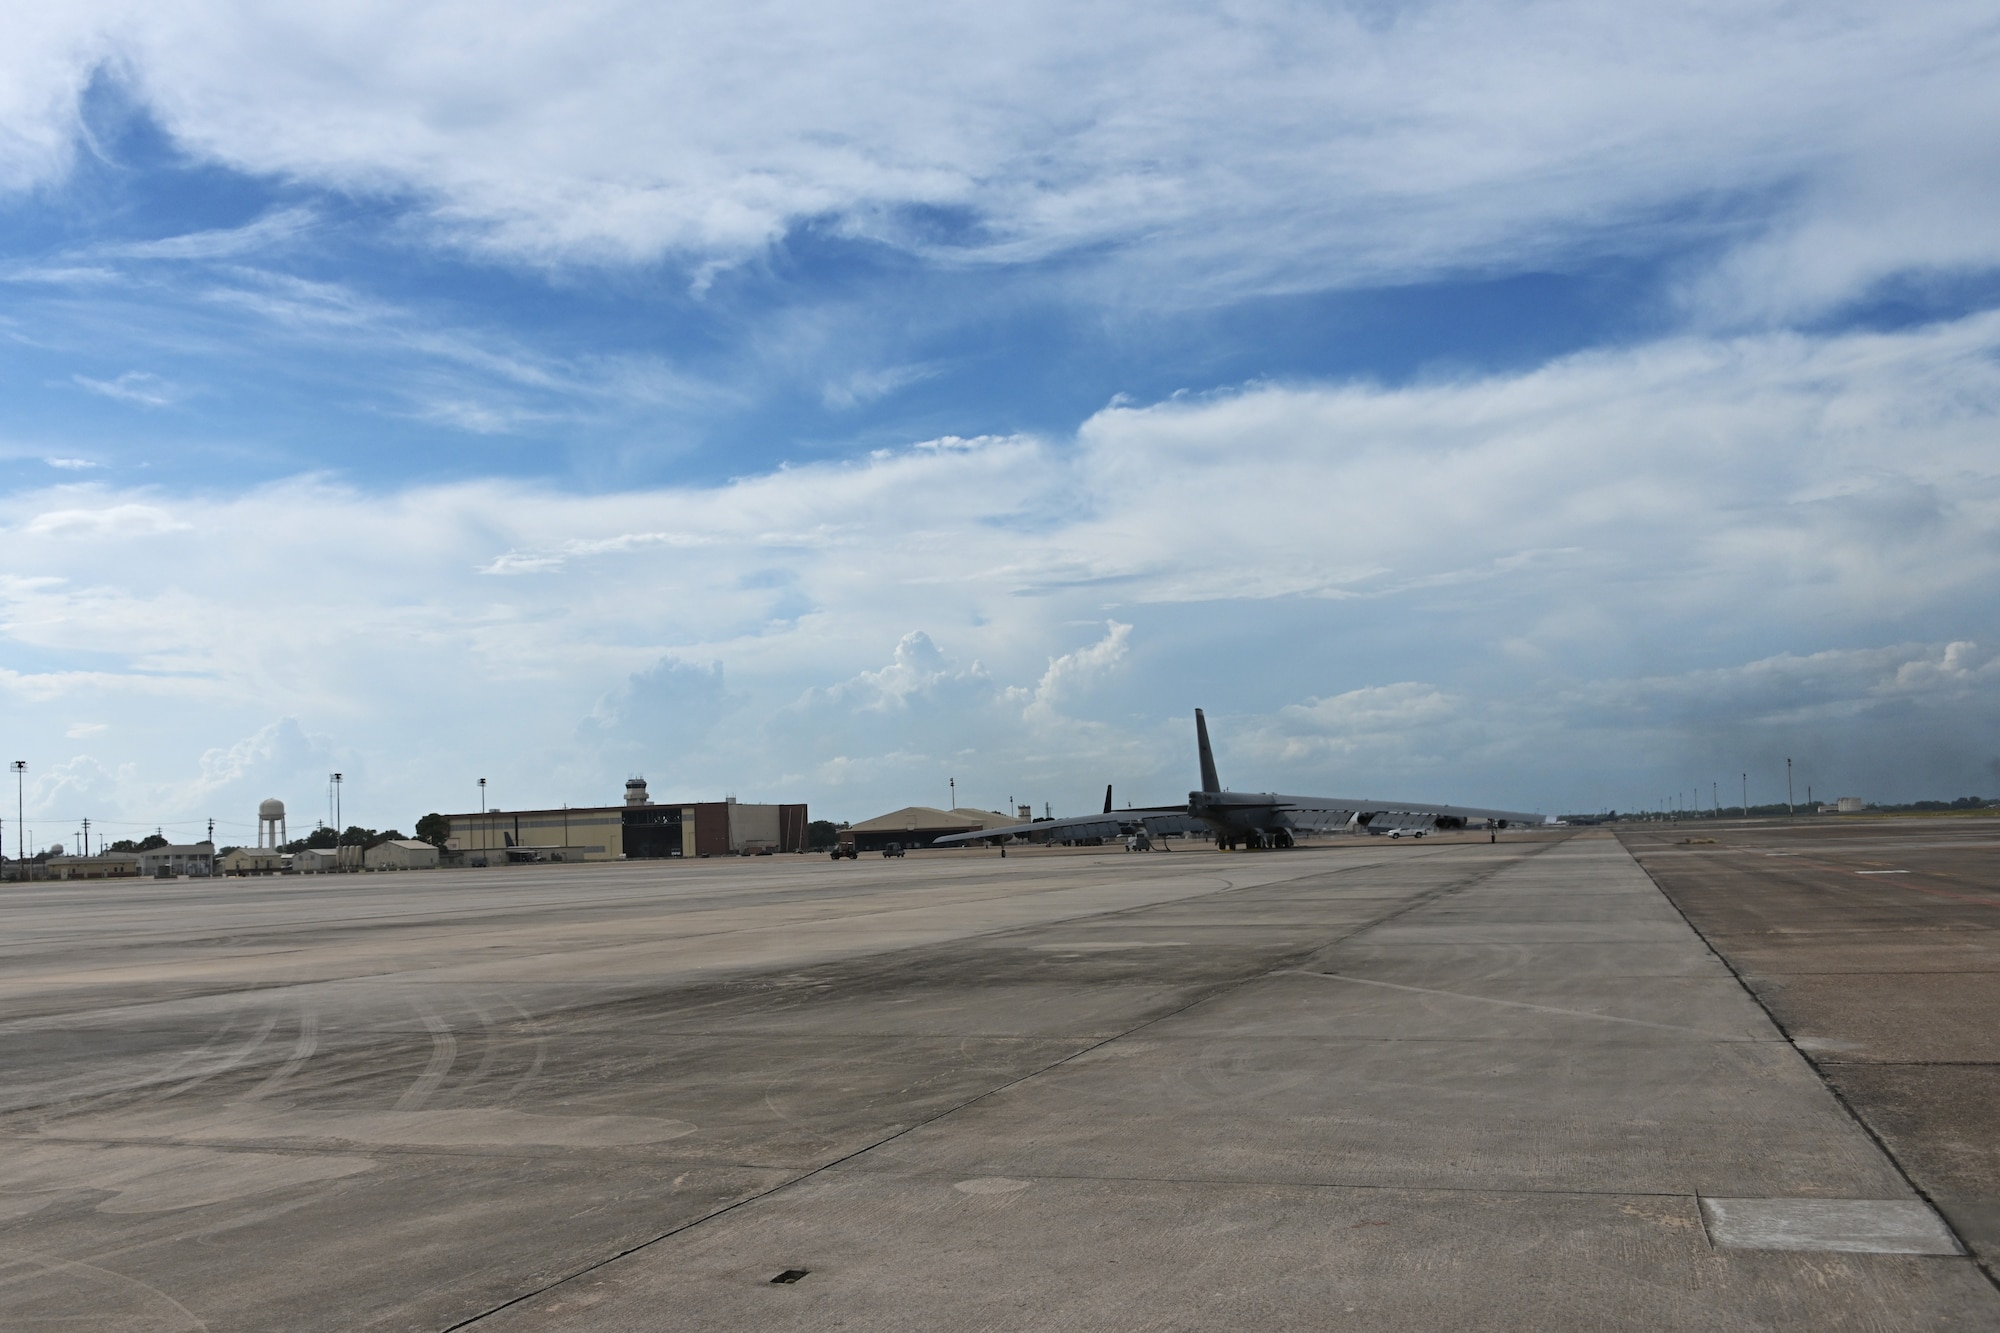 A B-52 sits on the flight line at Barksdale.